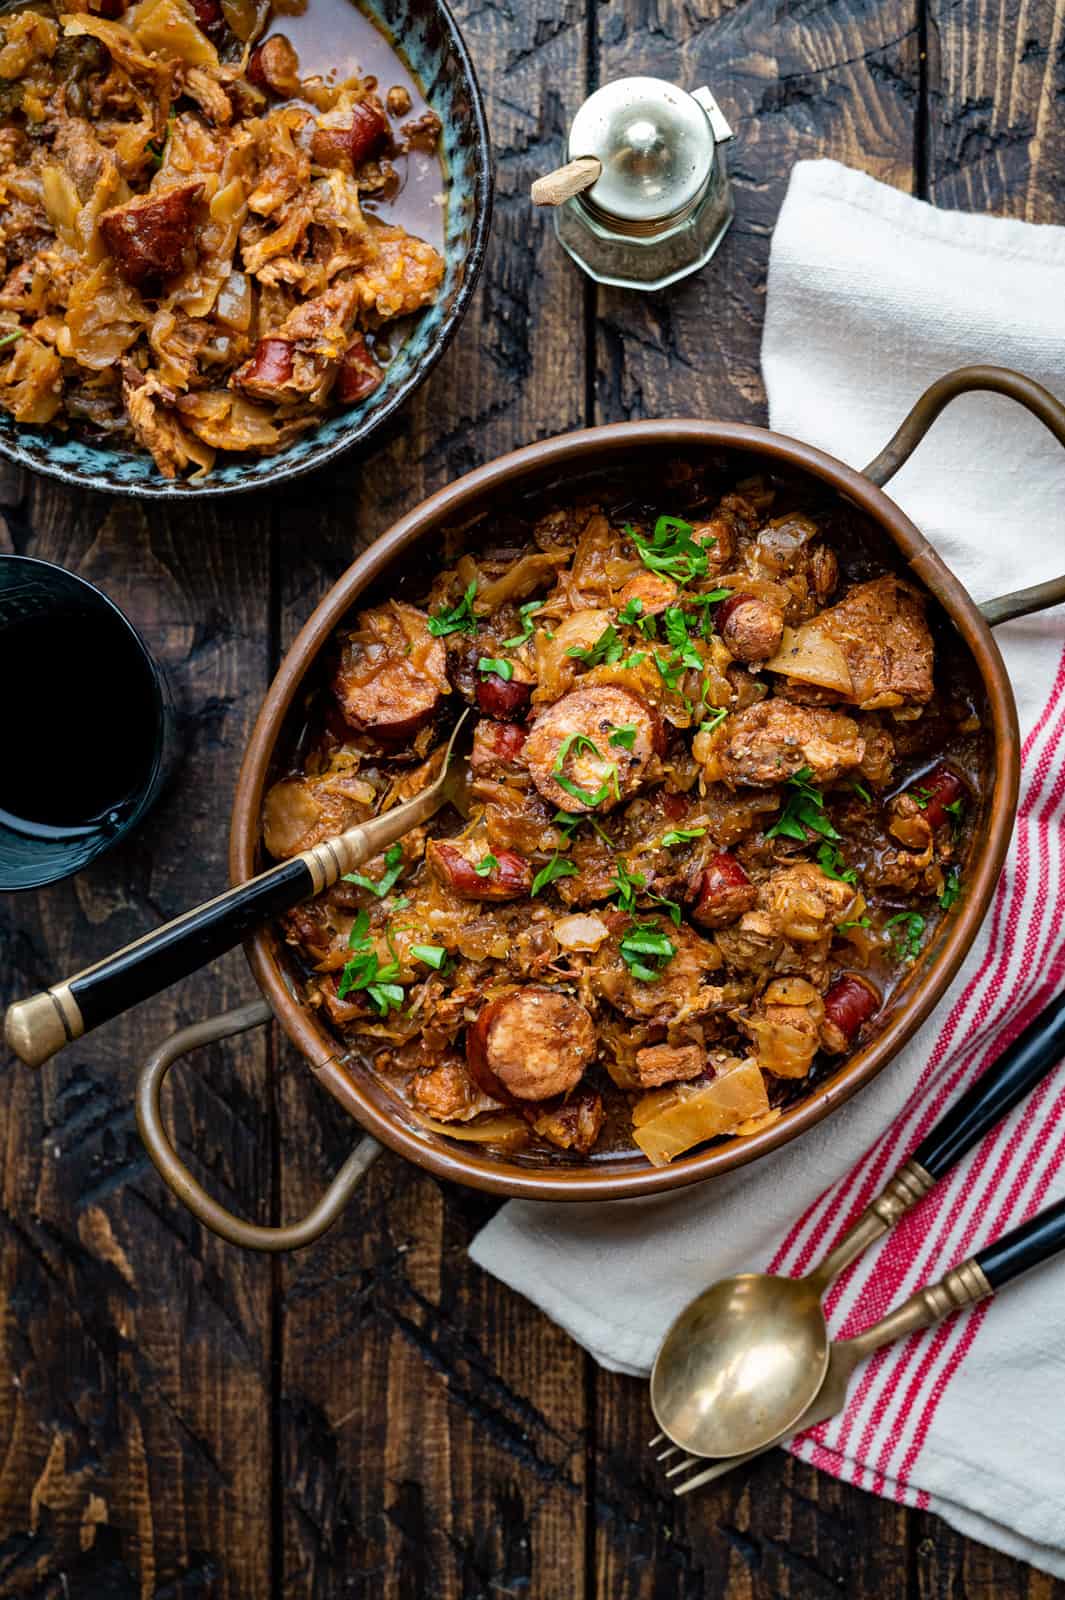 Polish bigos stew in a rustic copper casserole with a portion on the side